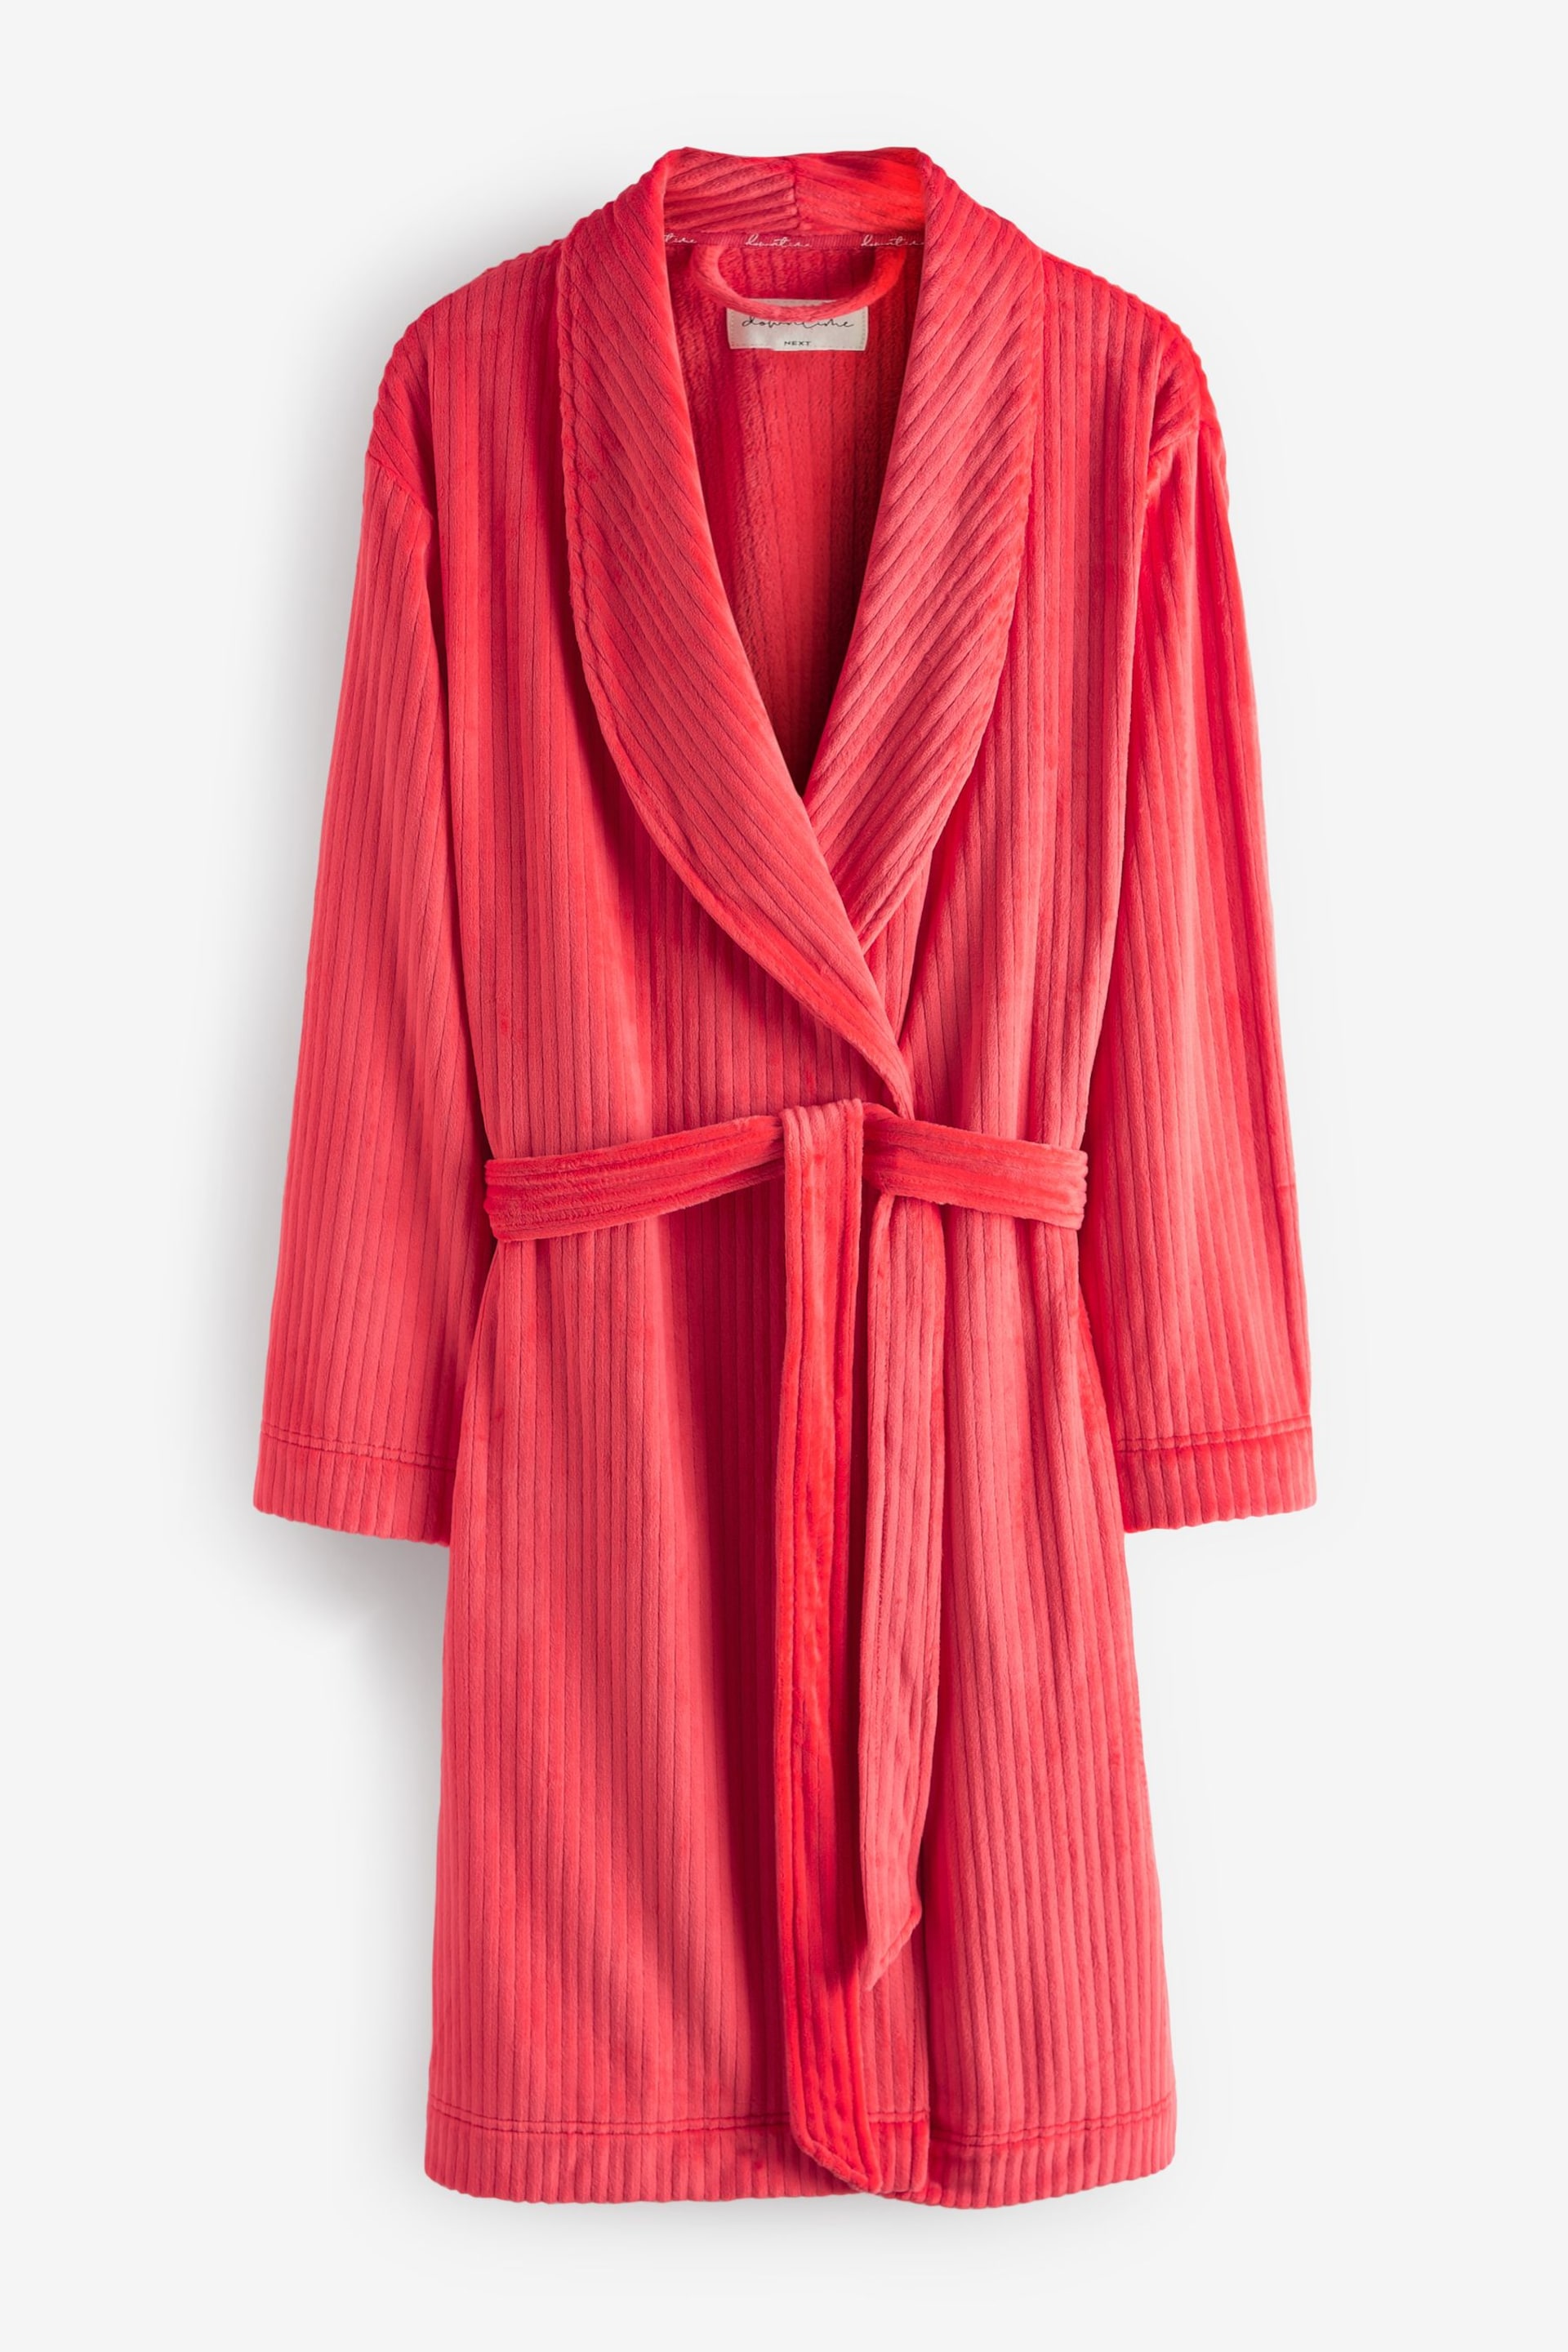 Red Supersoft Ribbed Dressing Gown - Image 3 of 4